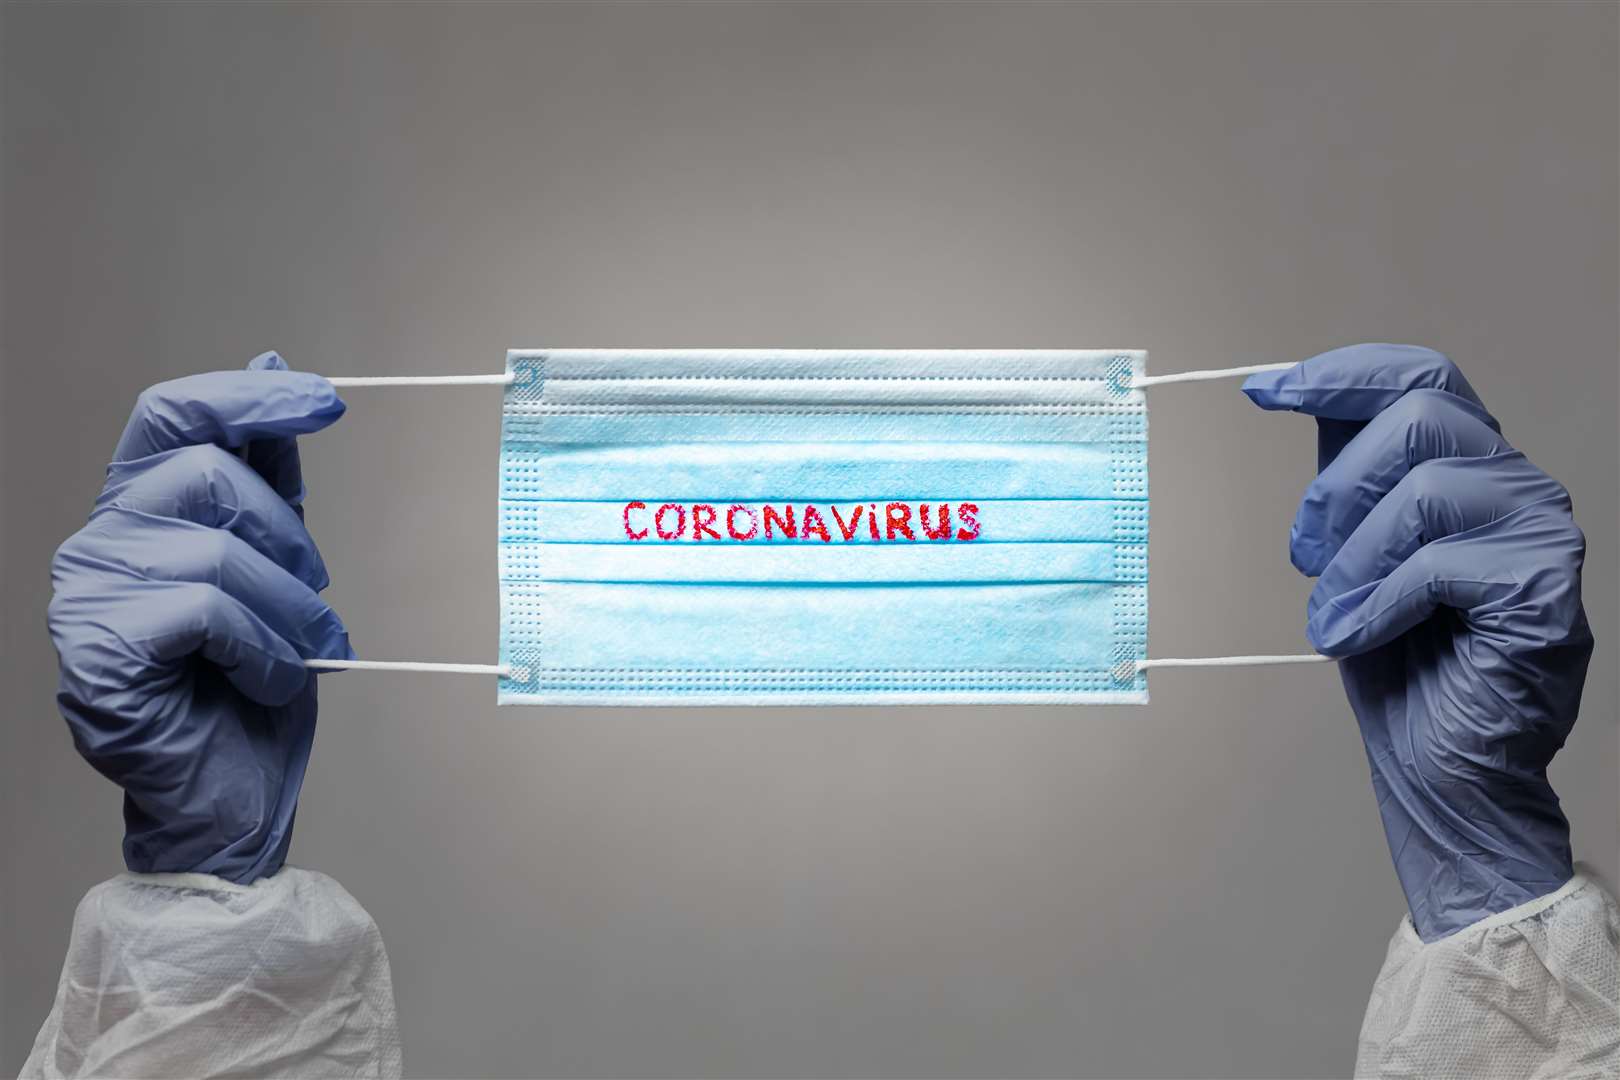 CORONAVIRUS. COVID-19 concept. blue medical face mask with a red inscription CORONAVIRUS in the hands of which are in rubber gloves. vignette image